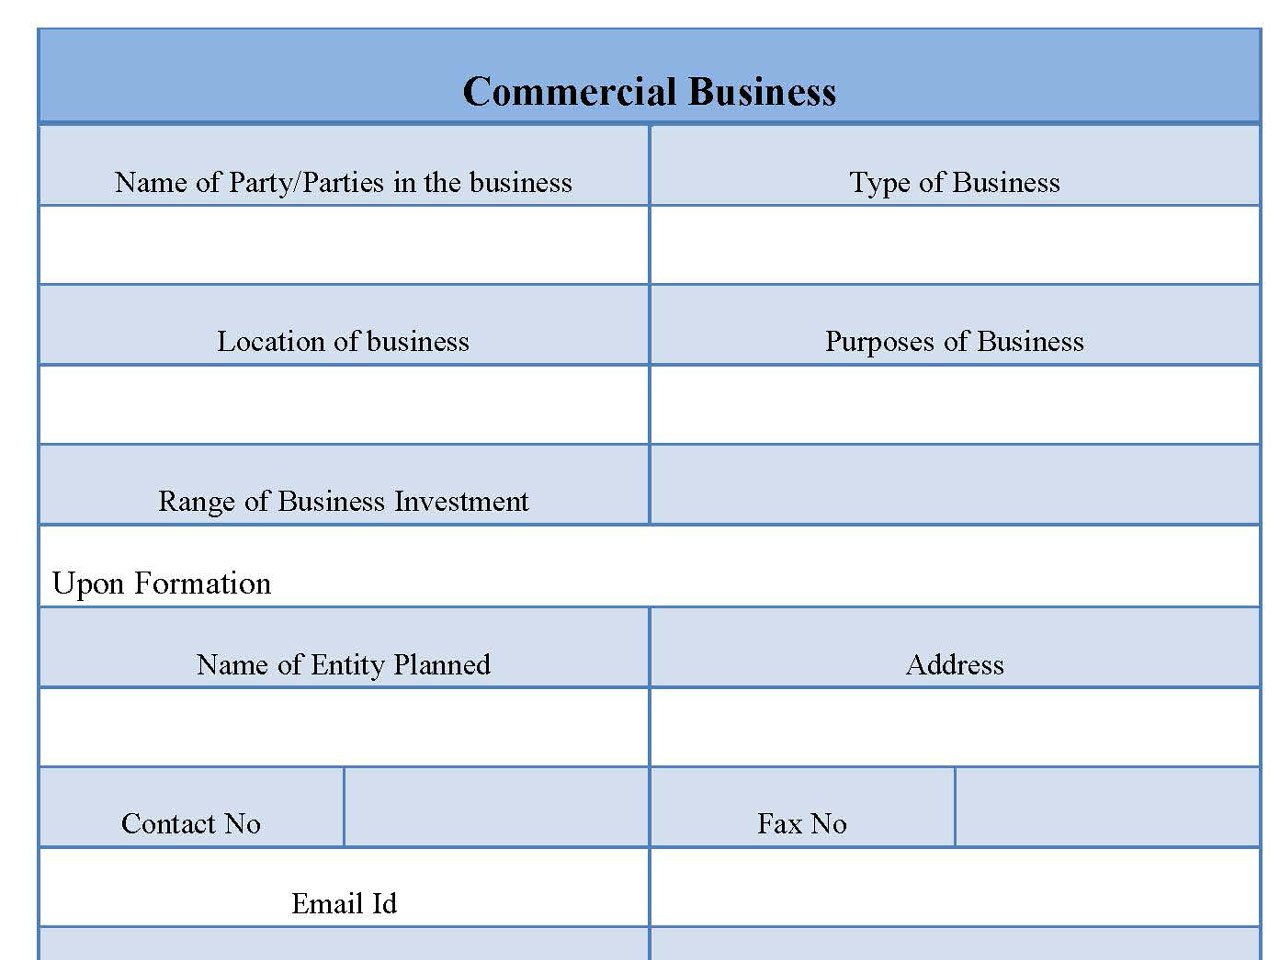 Commercial Business Form